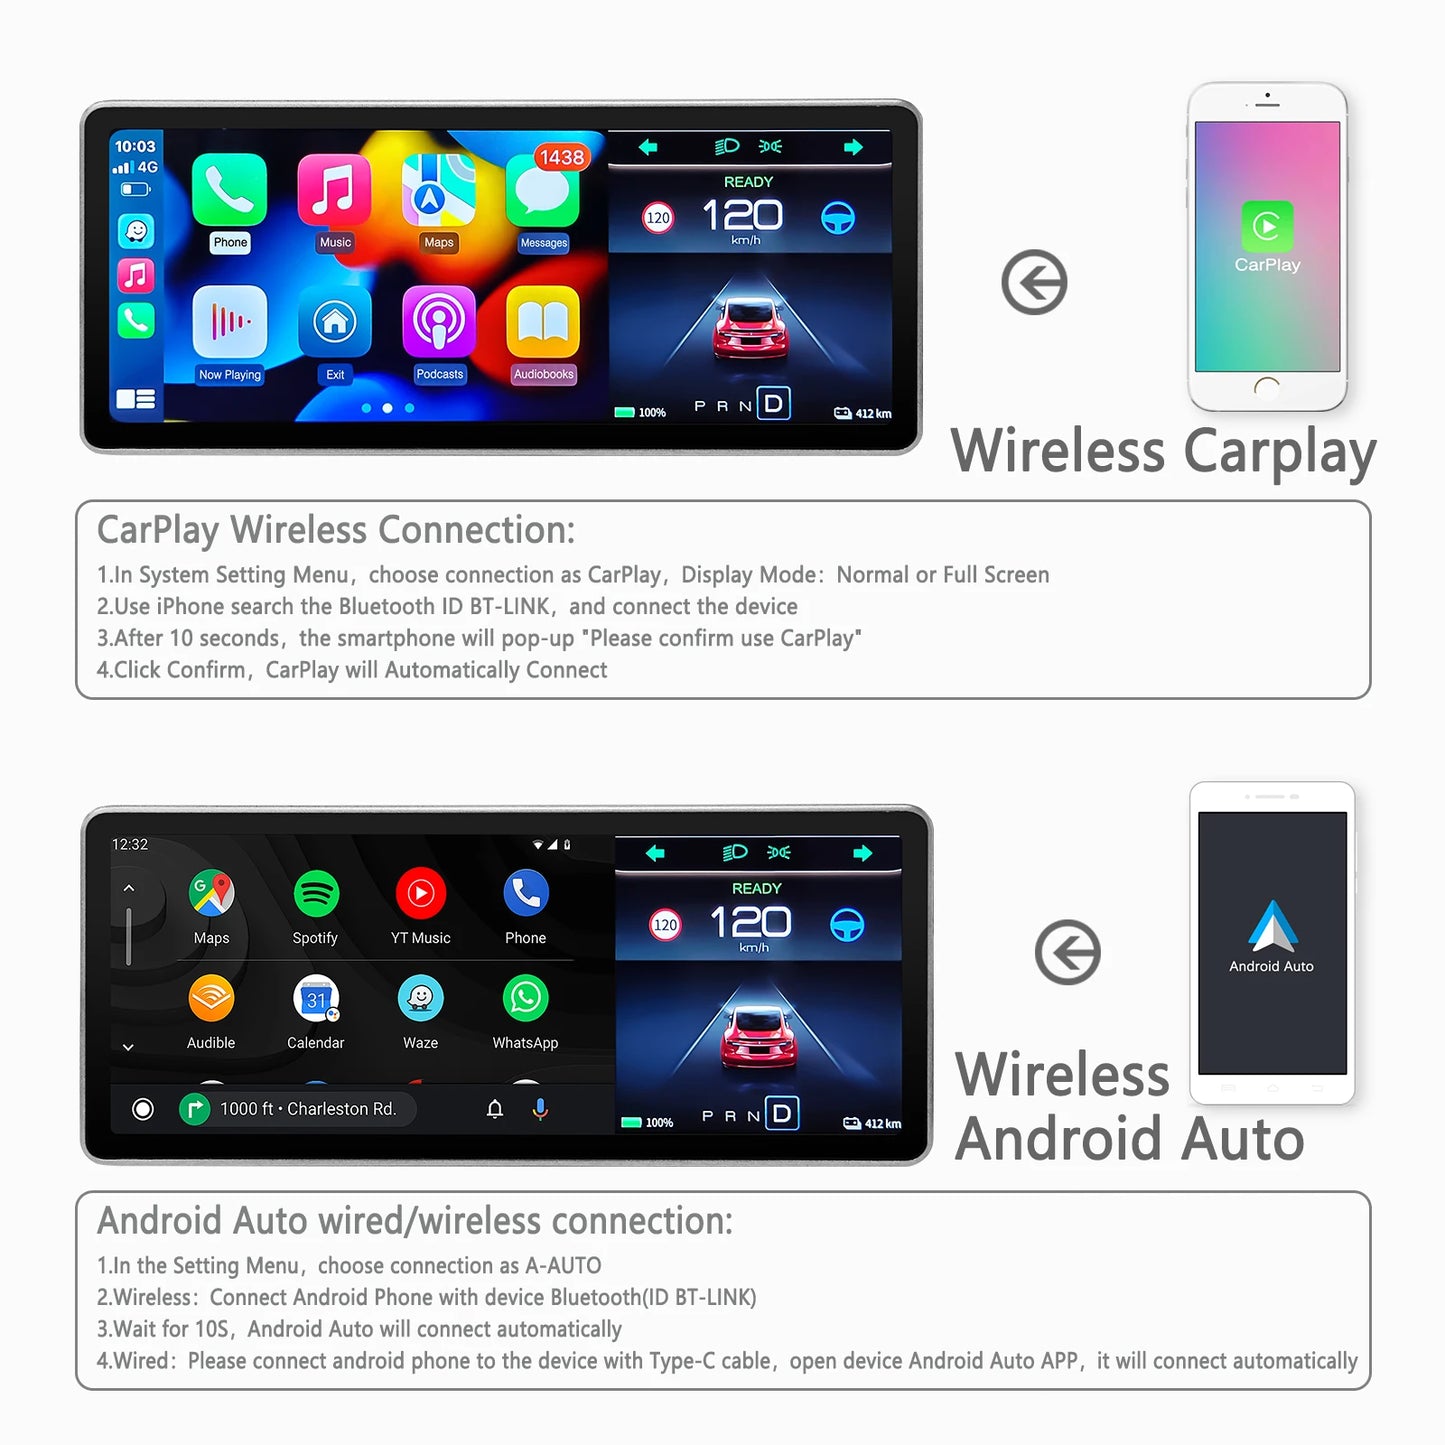 CATRONICS for 2023Tesla Accessories Model 3 Y Digital Dashboard Heads Up Display Carplay Android Auto for Tesla HUD Accessories